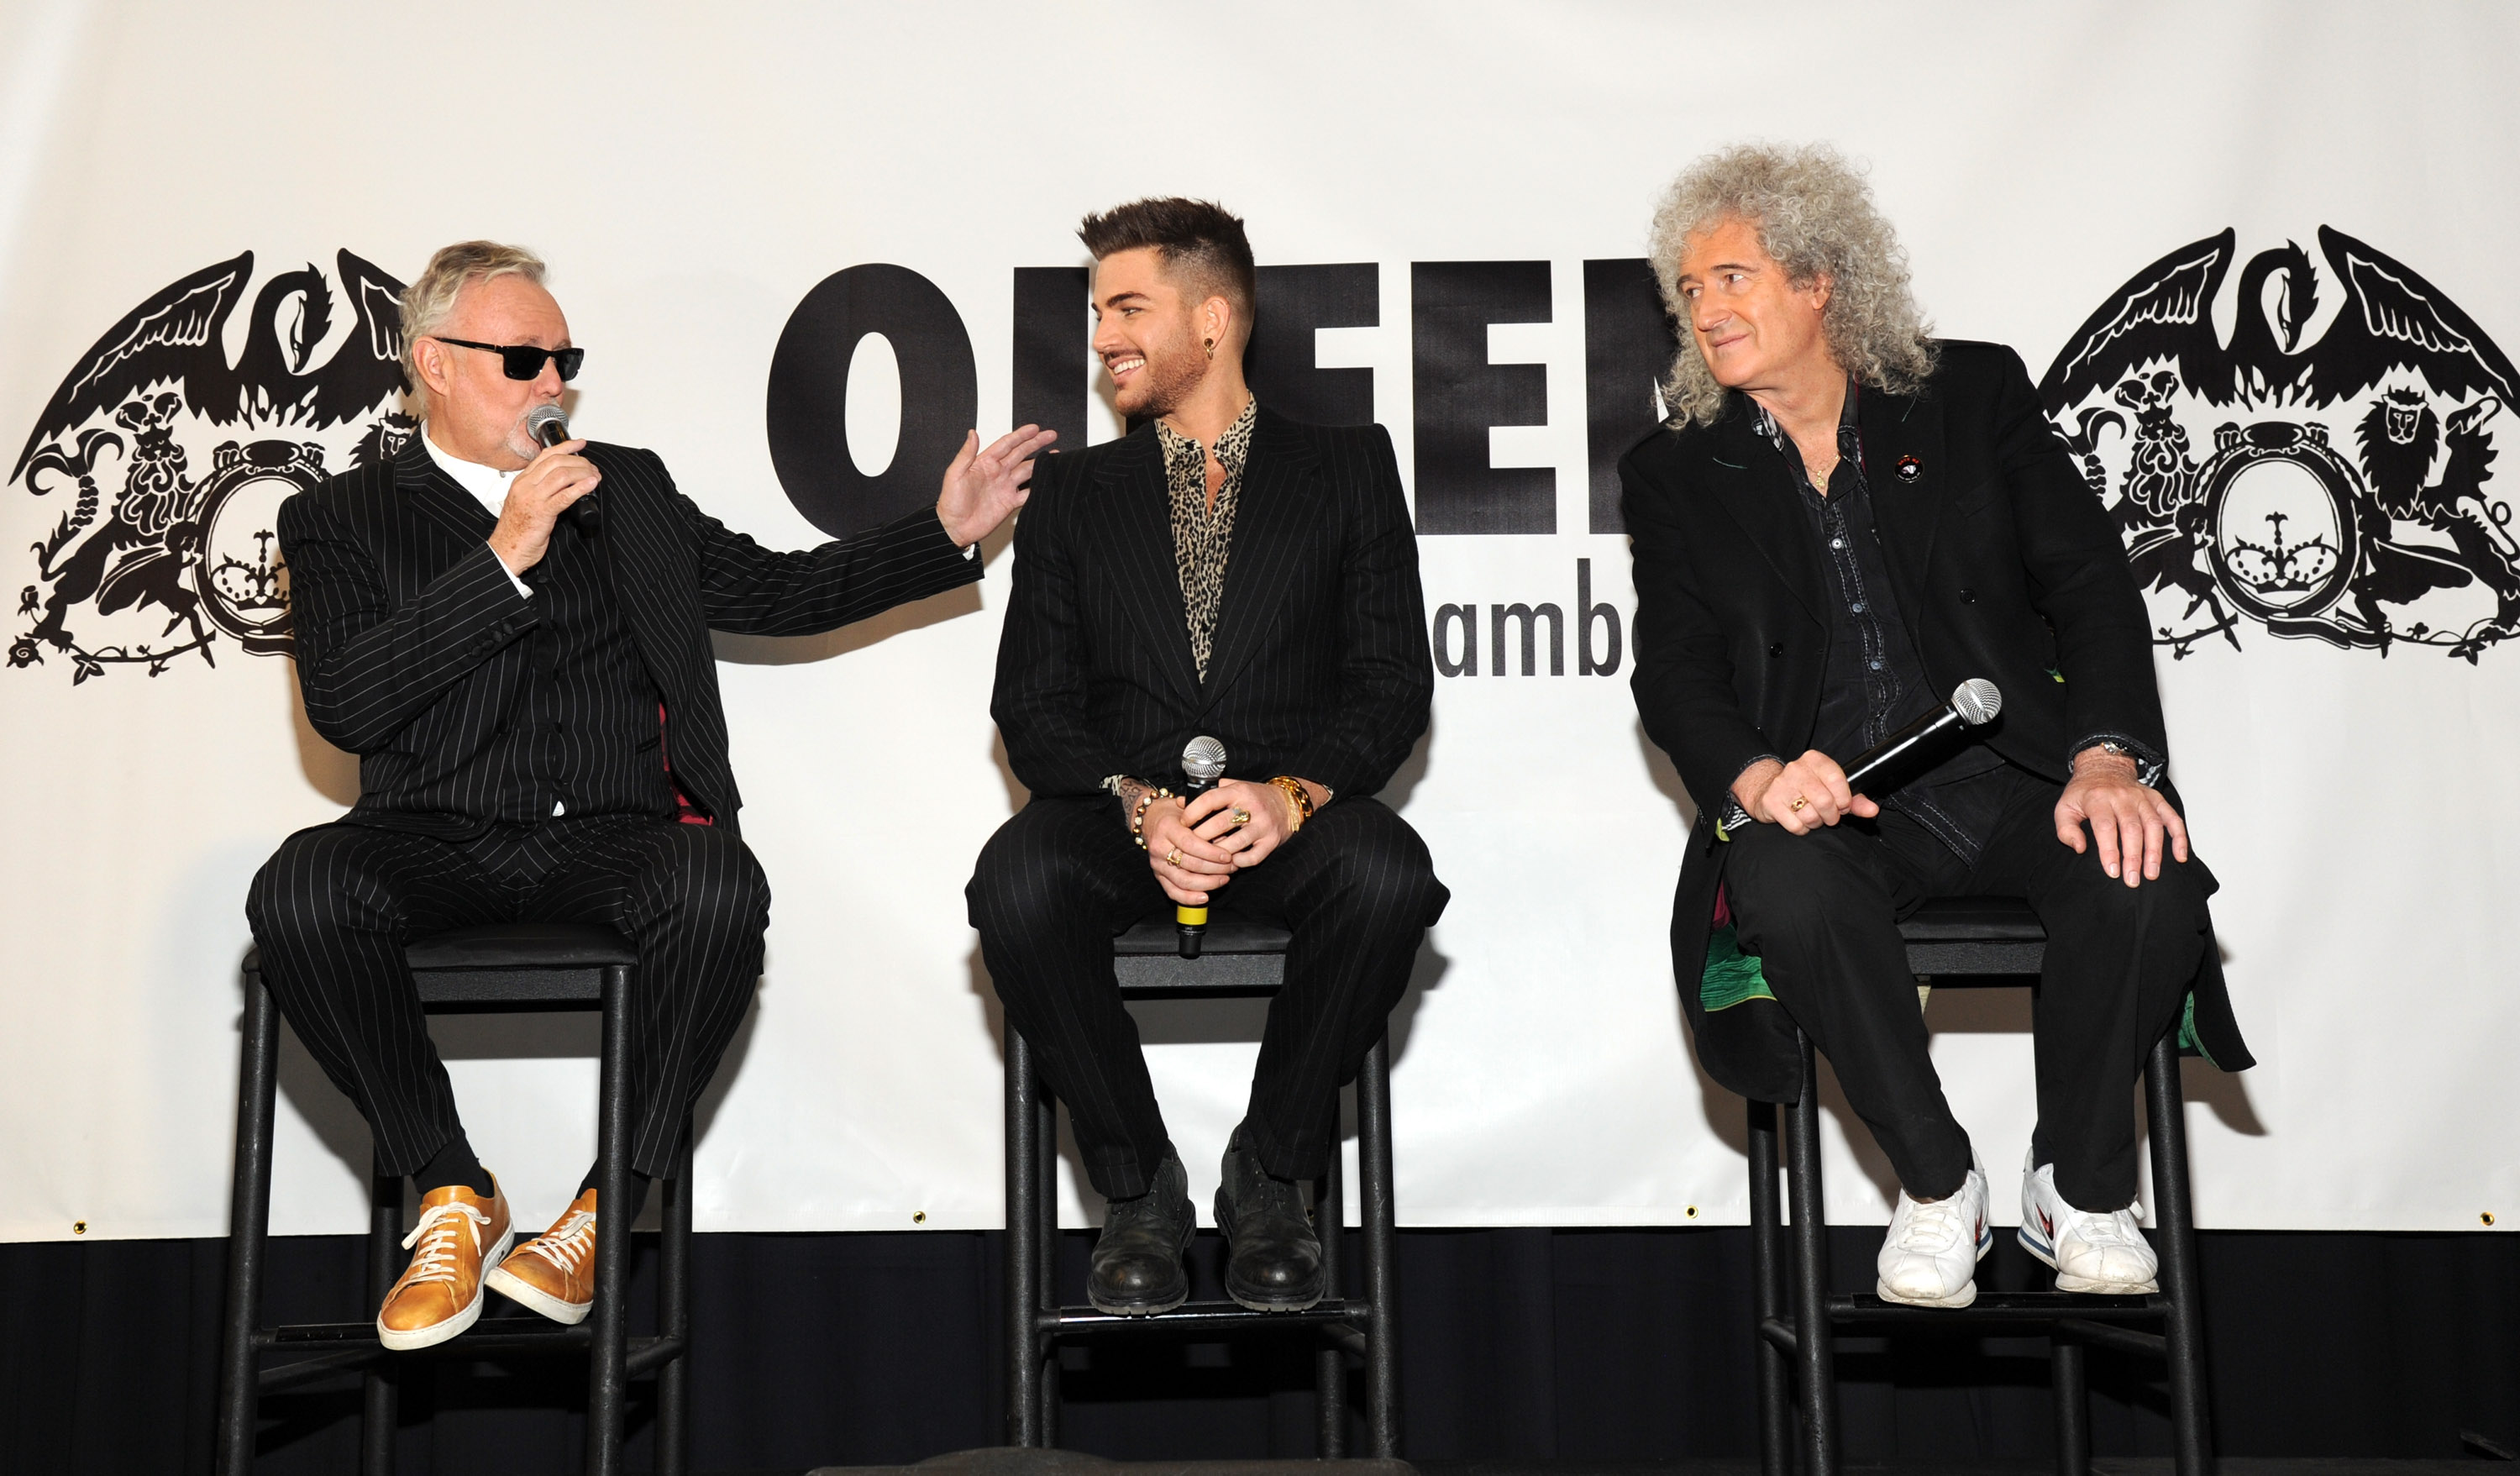 Roger Taylor, Adam Lambert and Brian May during Queen (Brian May and Roger Taylor) + Adam Lambert North American tour announcement at Madison Square Garden on March 6, 2014 in New York City. (Kevin Mazur—WireImage)